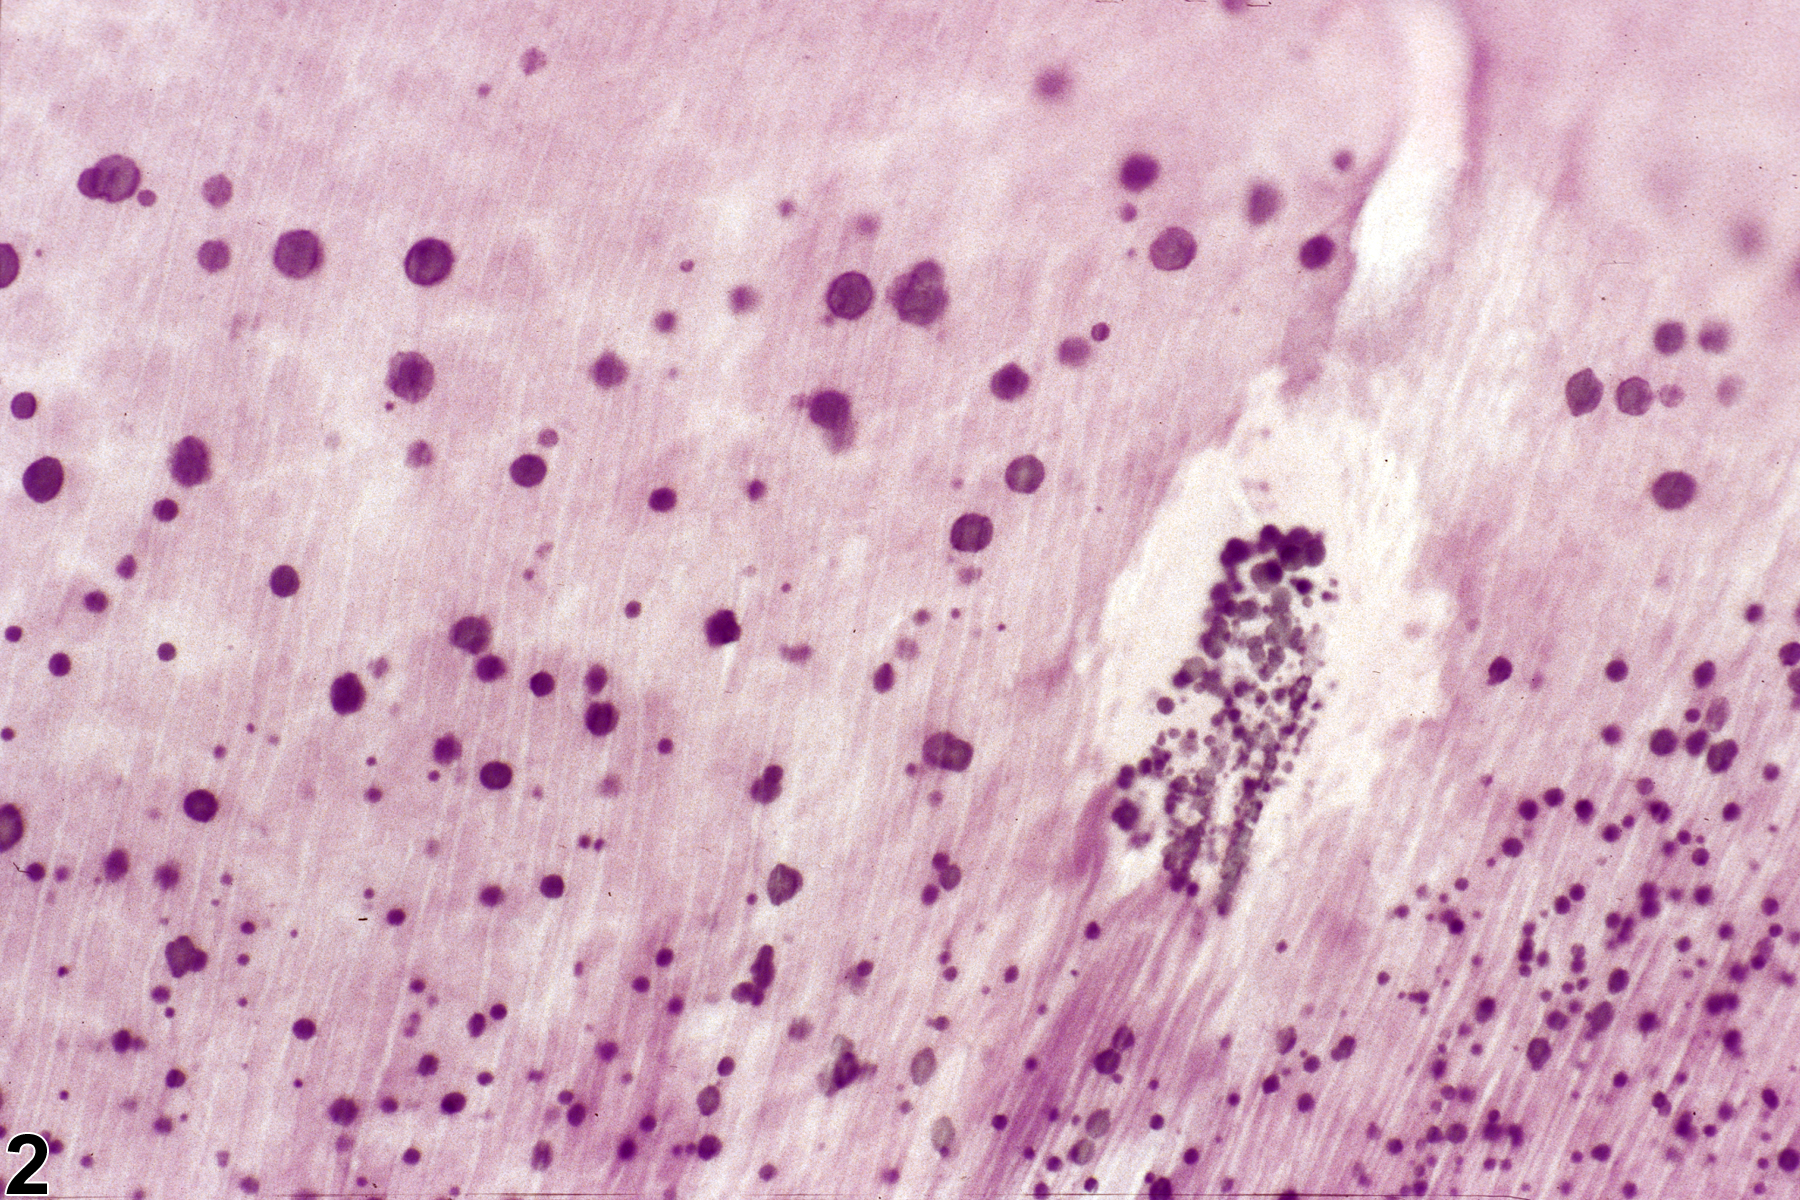 Image of baspholic granules in the tooth from a male F344/N rat in a chronic study